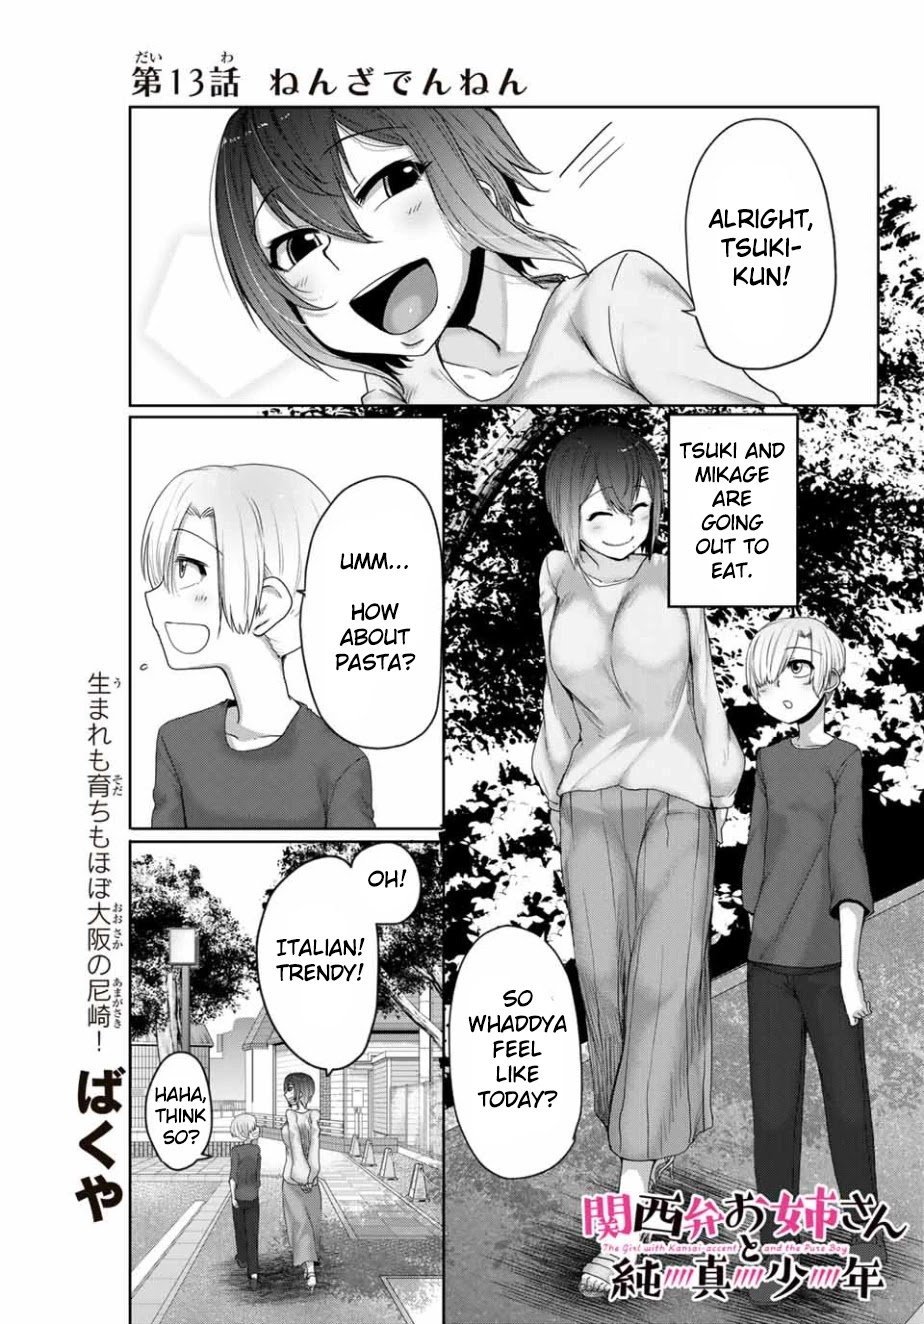 The Girl with a Kansai Accent and the Pure Boy - Chapter 13 Page 1